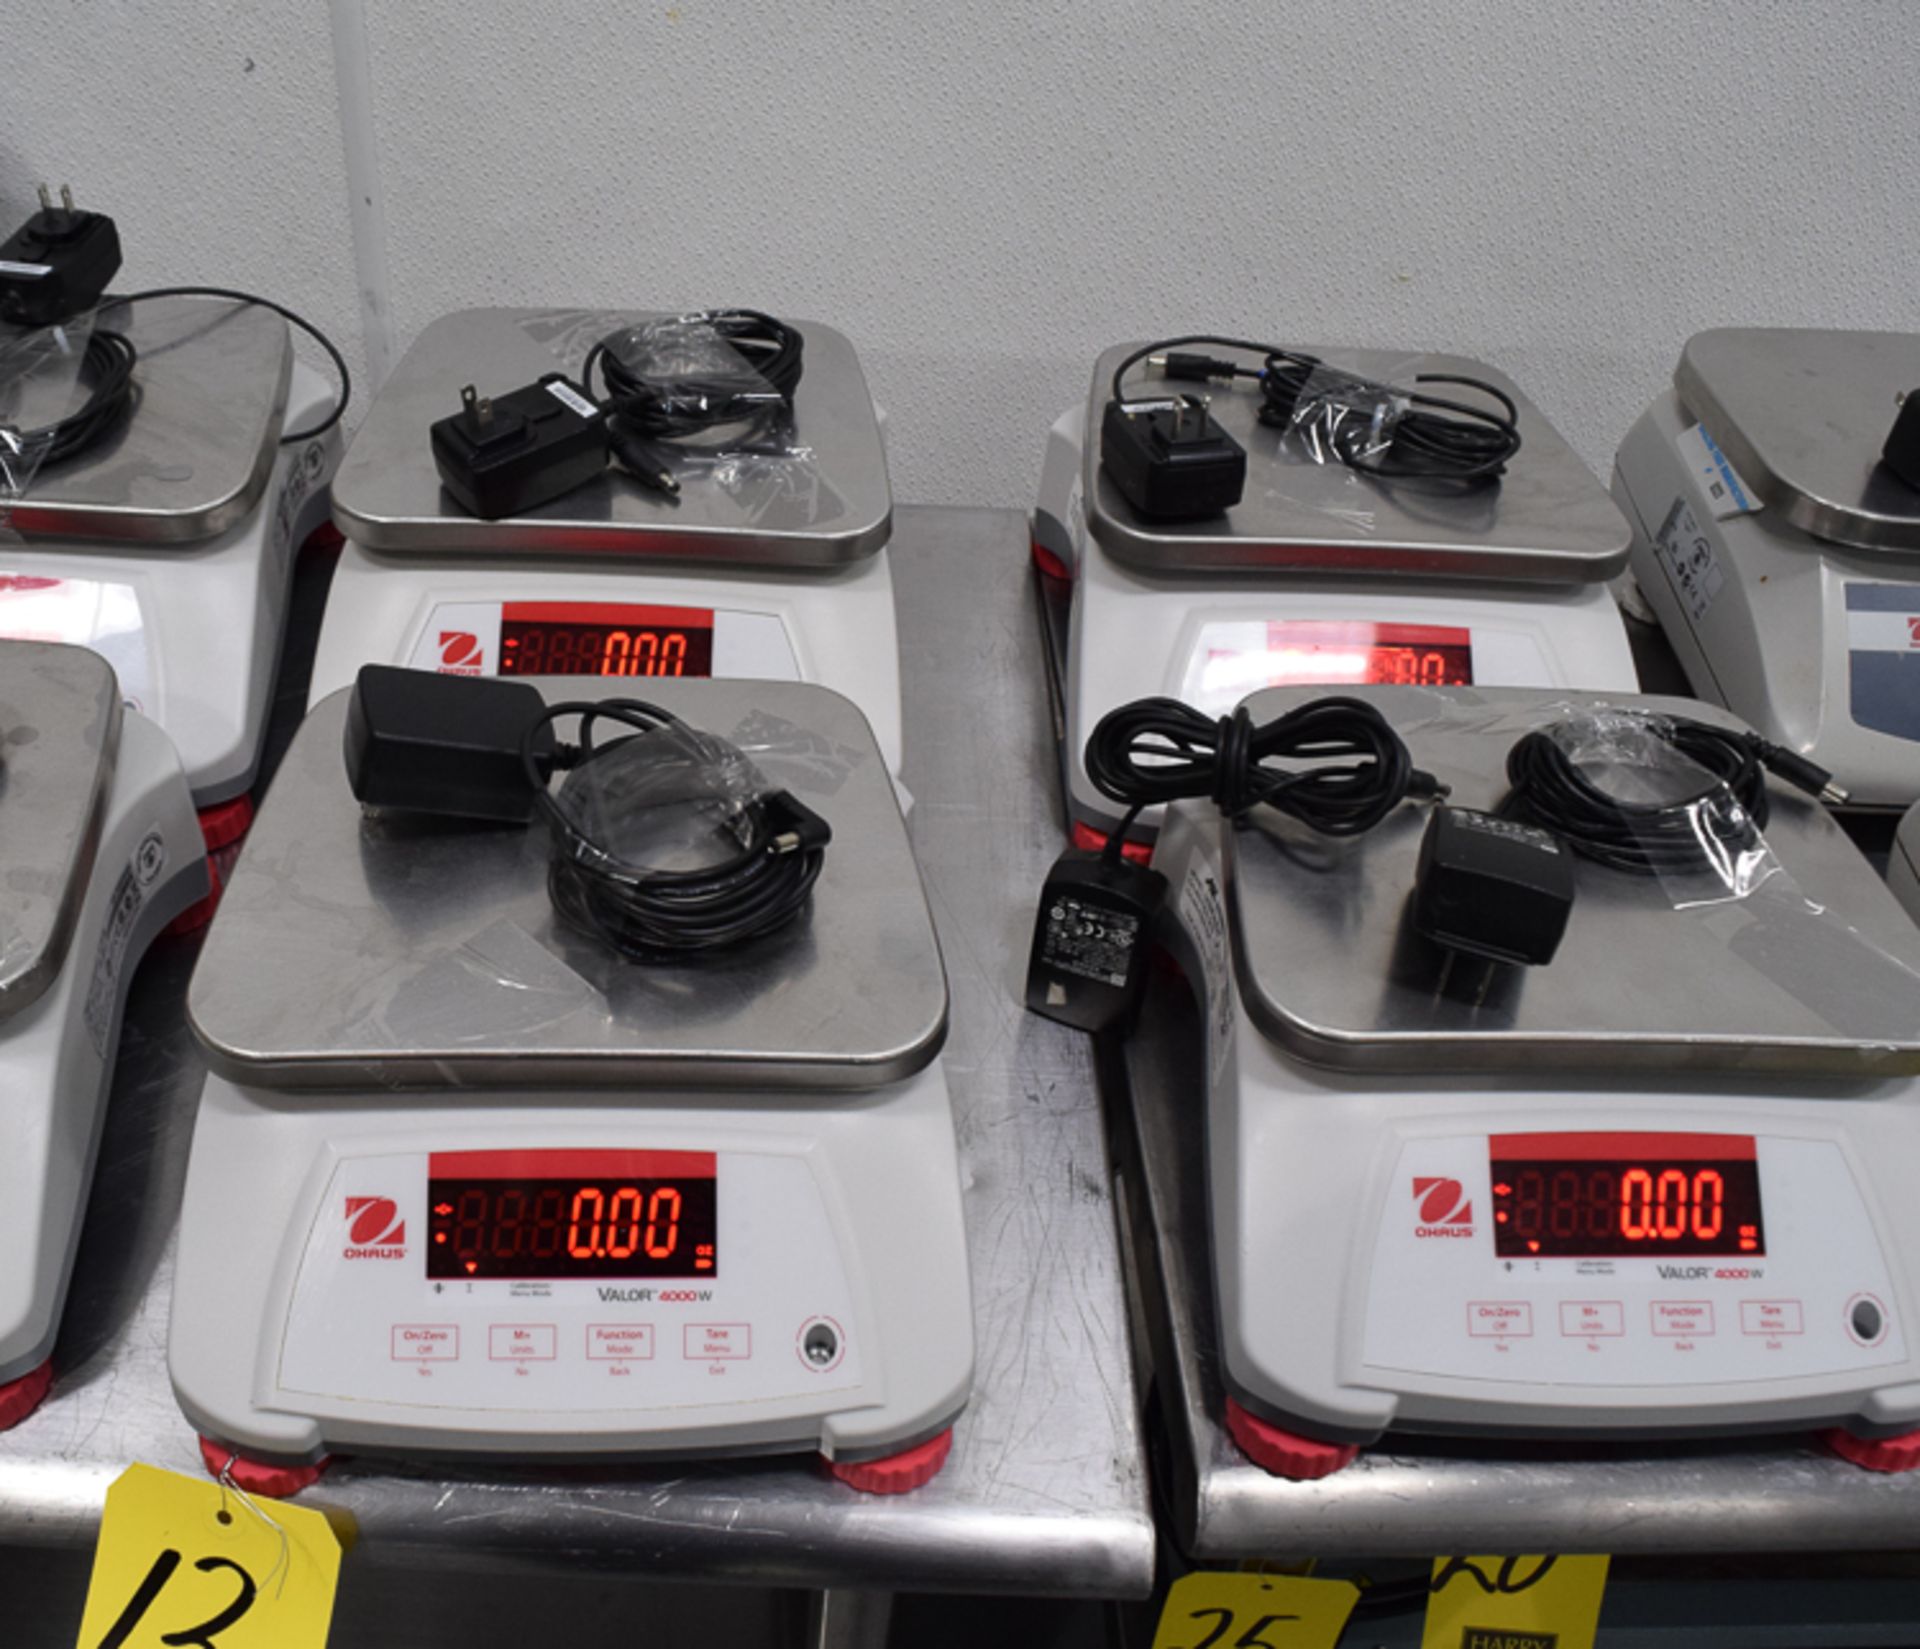 Ohaus Digital Scale, Model: Valor 4000W, Rigging Fee: Please Contact US Rigging 920-655-2767